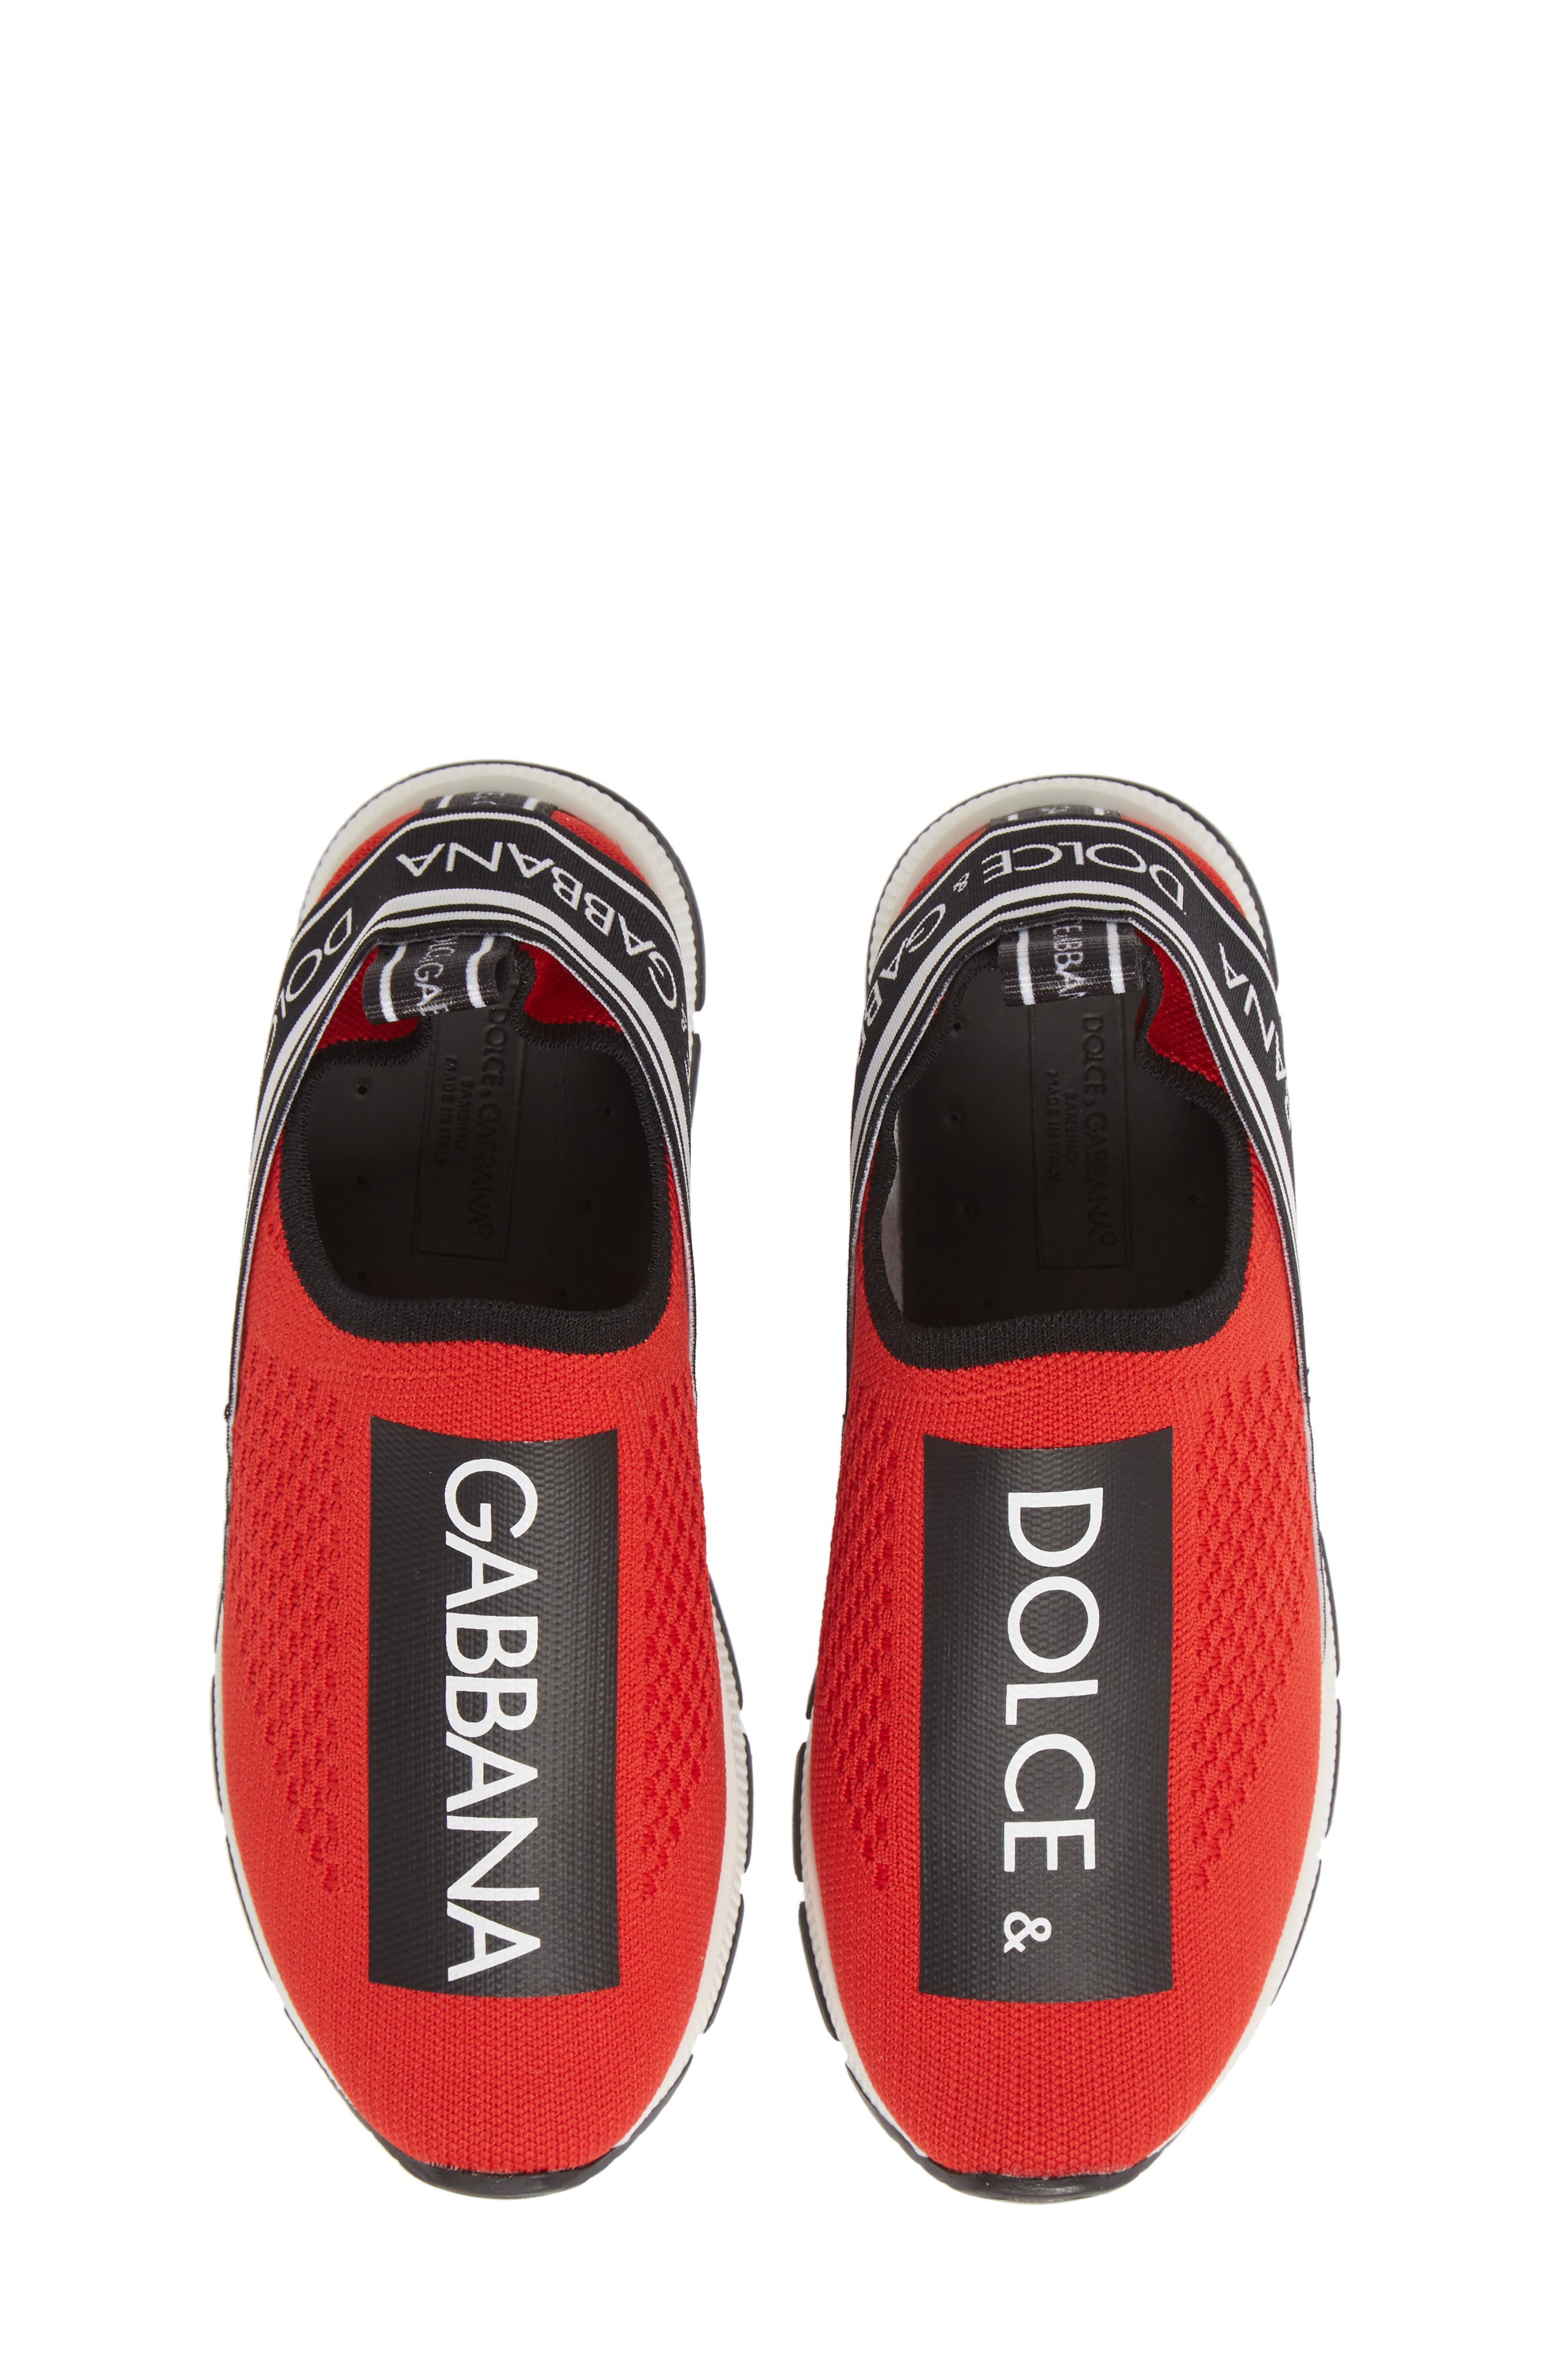 dolce and gabbana shoes nordstrom